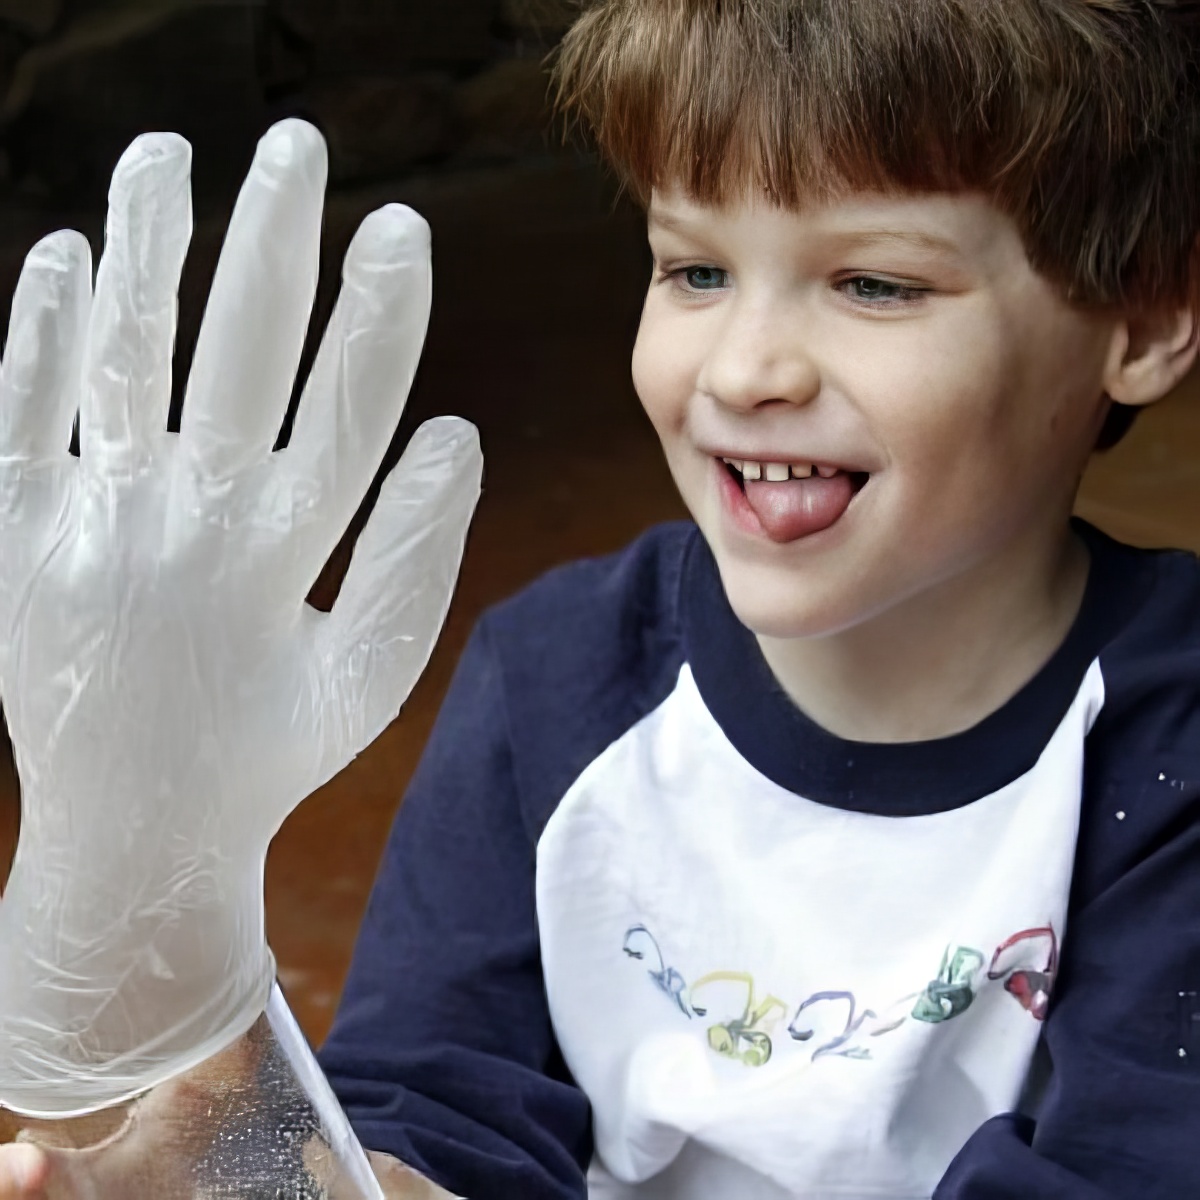 Chemical Reaction for kids, boy with tongue out holding a glove